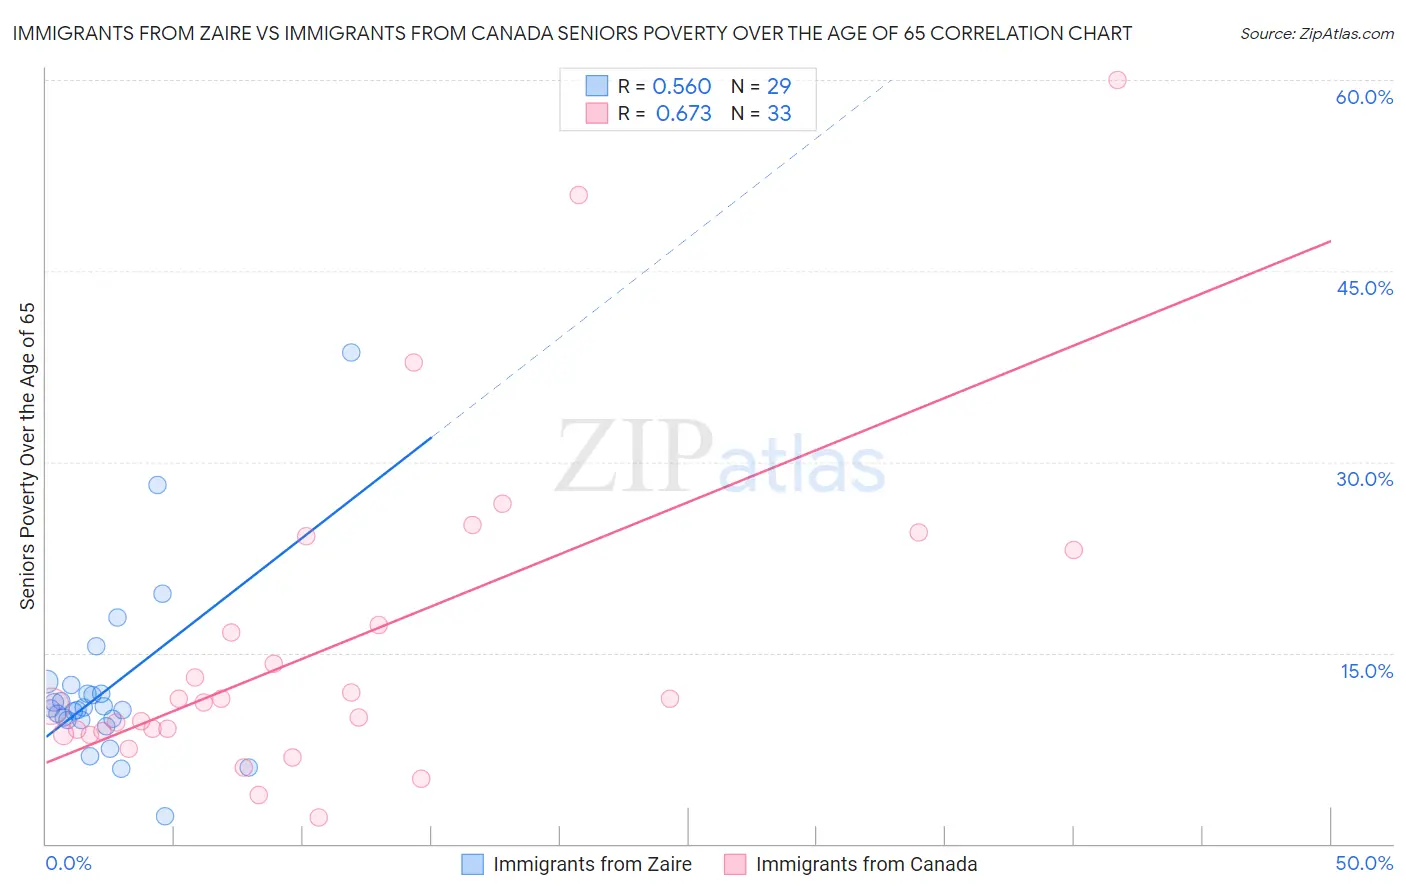 Immigrants from Zaire vs Immigrants from Canada Seniors Poverty Over the Age of 65